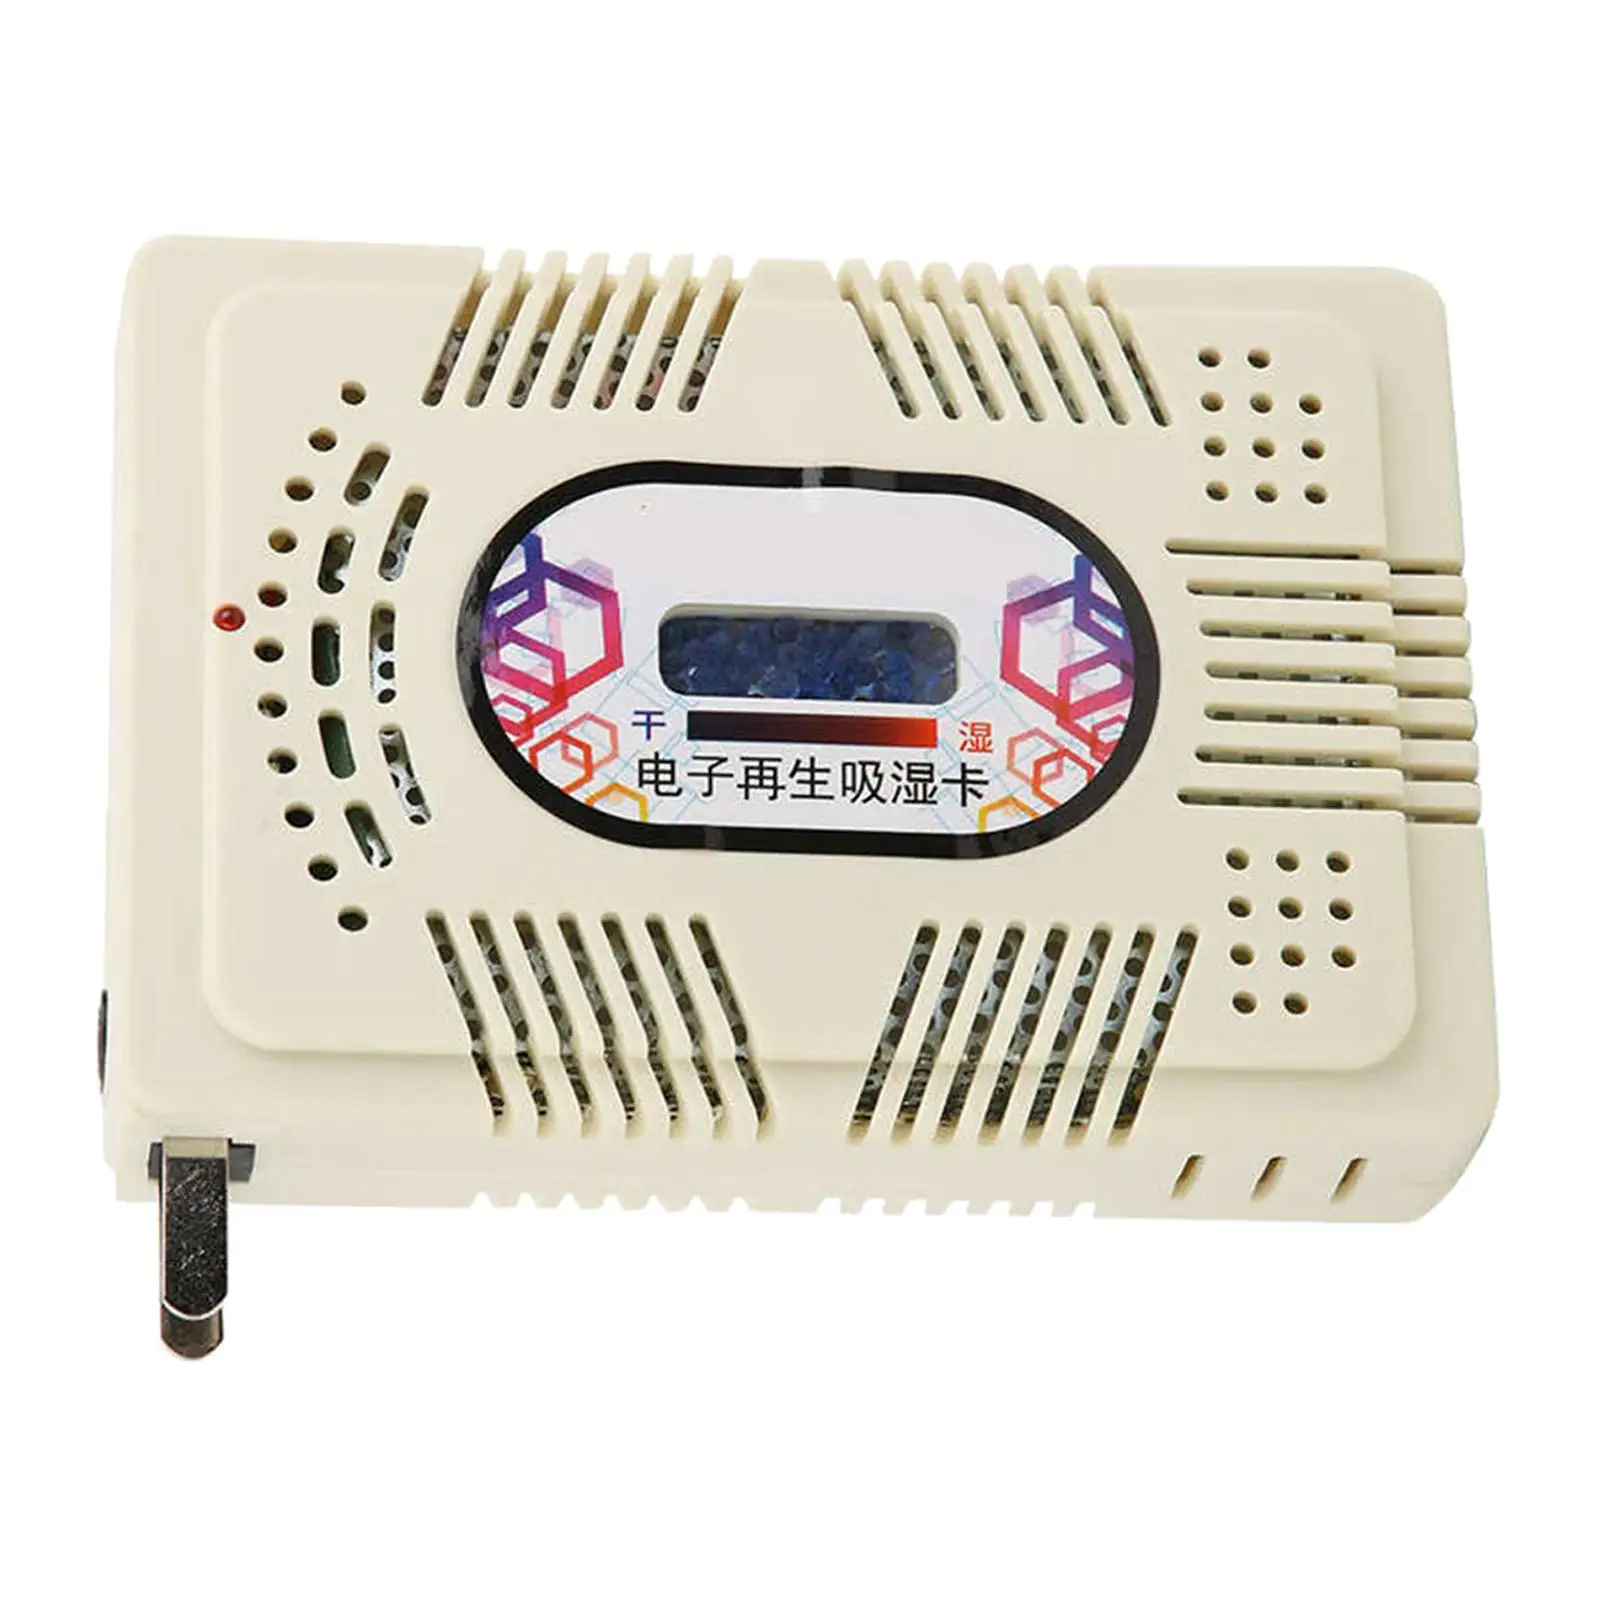 Electronic Regeneration Hygroscopic Card Widely Applicable Convenient 16W 138x98x33mm Easy to Use Portable White Accessories US